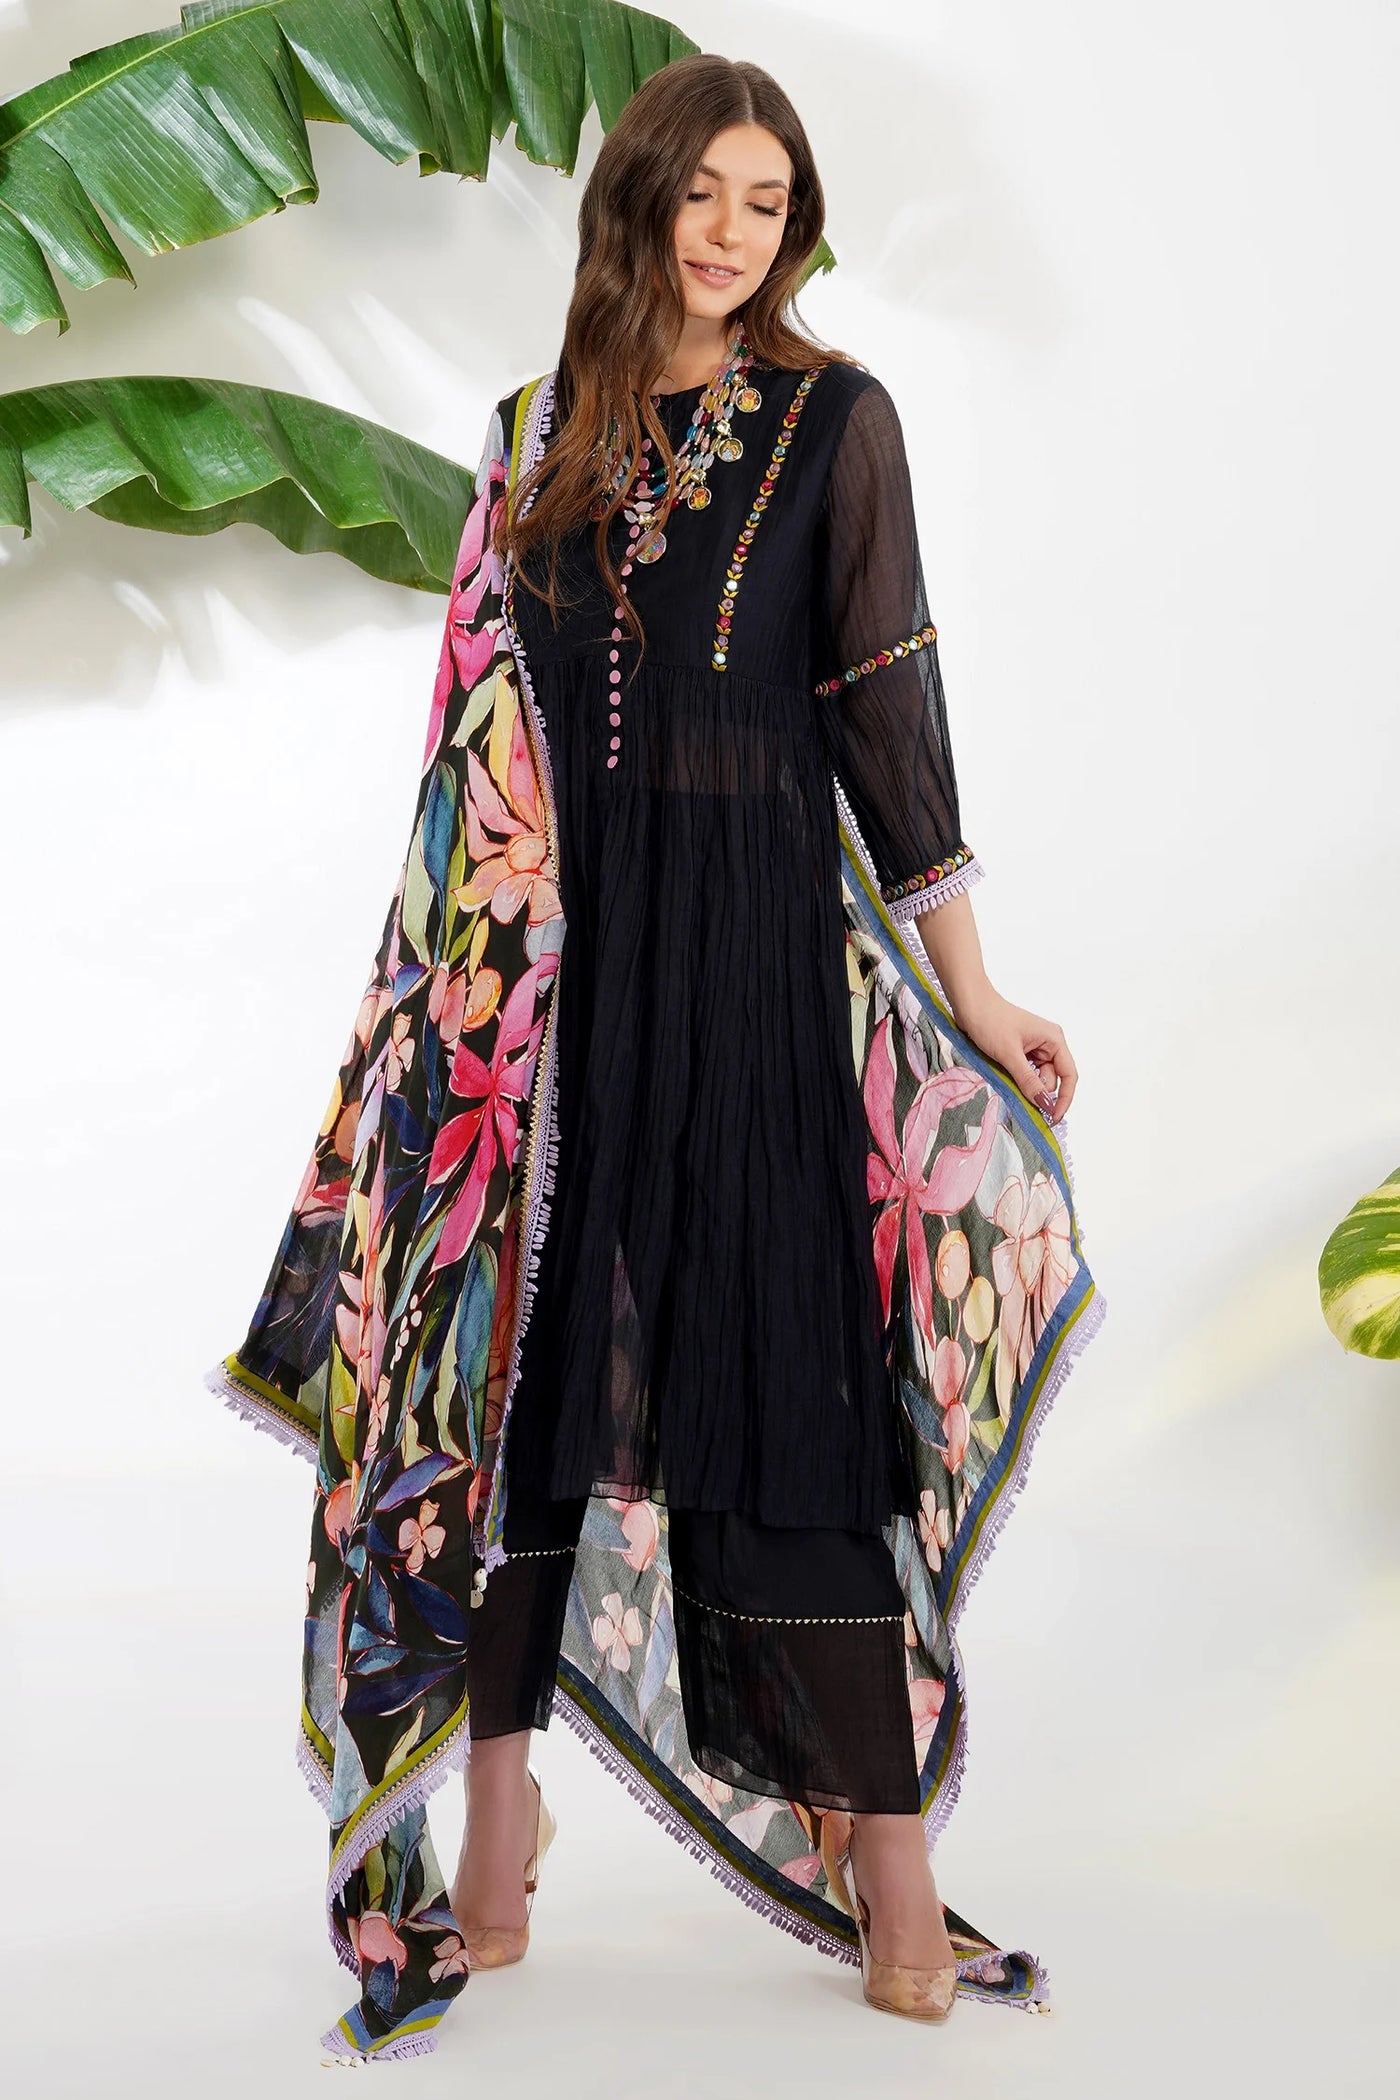 Black Anarkali Set with Printed Dupatta Indian Clothing in Denver, CO, Aurora, CO, Boulder, CO, Fort Collins, CO, Colorado Springs, CO, Parker, CO, Highlands Ranch, CO, Cherry Creek, CO, Centennial, CO, and Longmont, CO. NATIONWIDE SHIPPING USA- India Fashion X